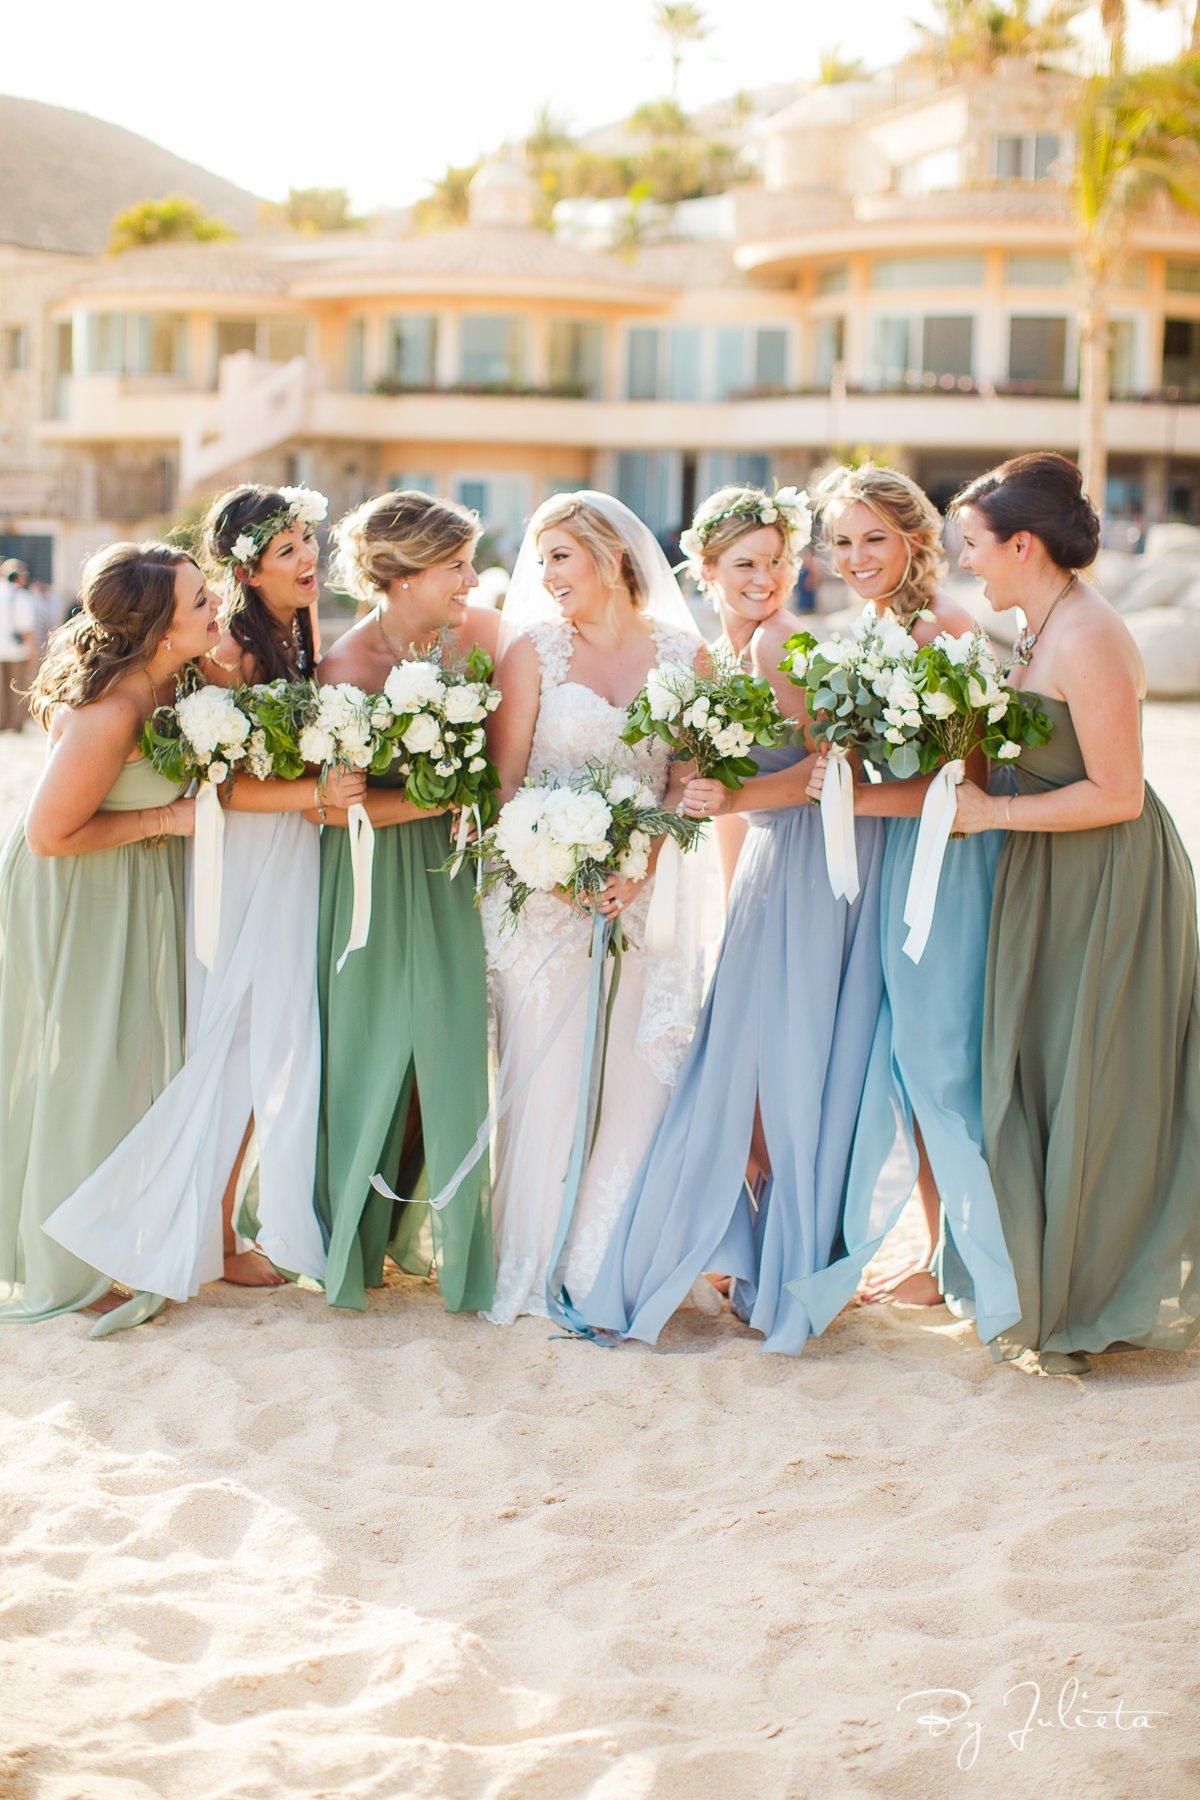 40 Best Bridesmaid Dresses For Every Type of Wedding Vibe | Vogue